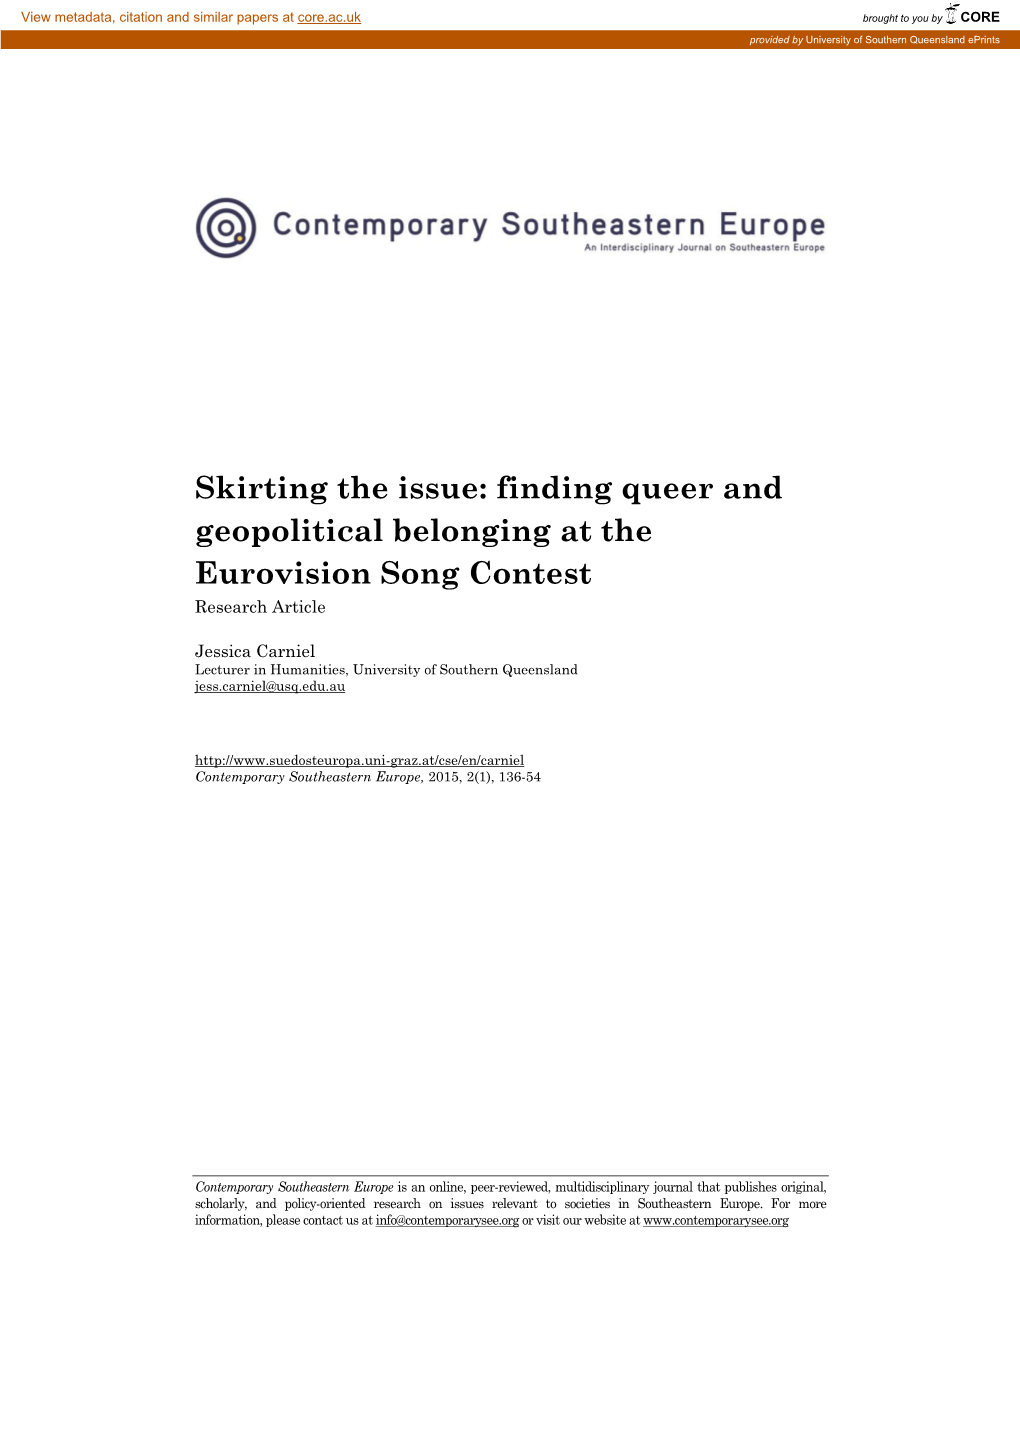 Finding Queer and Geopolitical Belonging at the Eurovision Song Contest Research Article